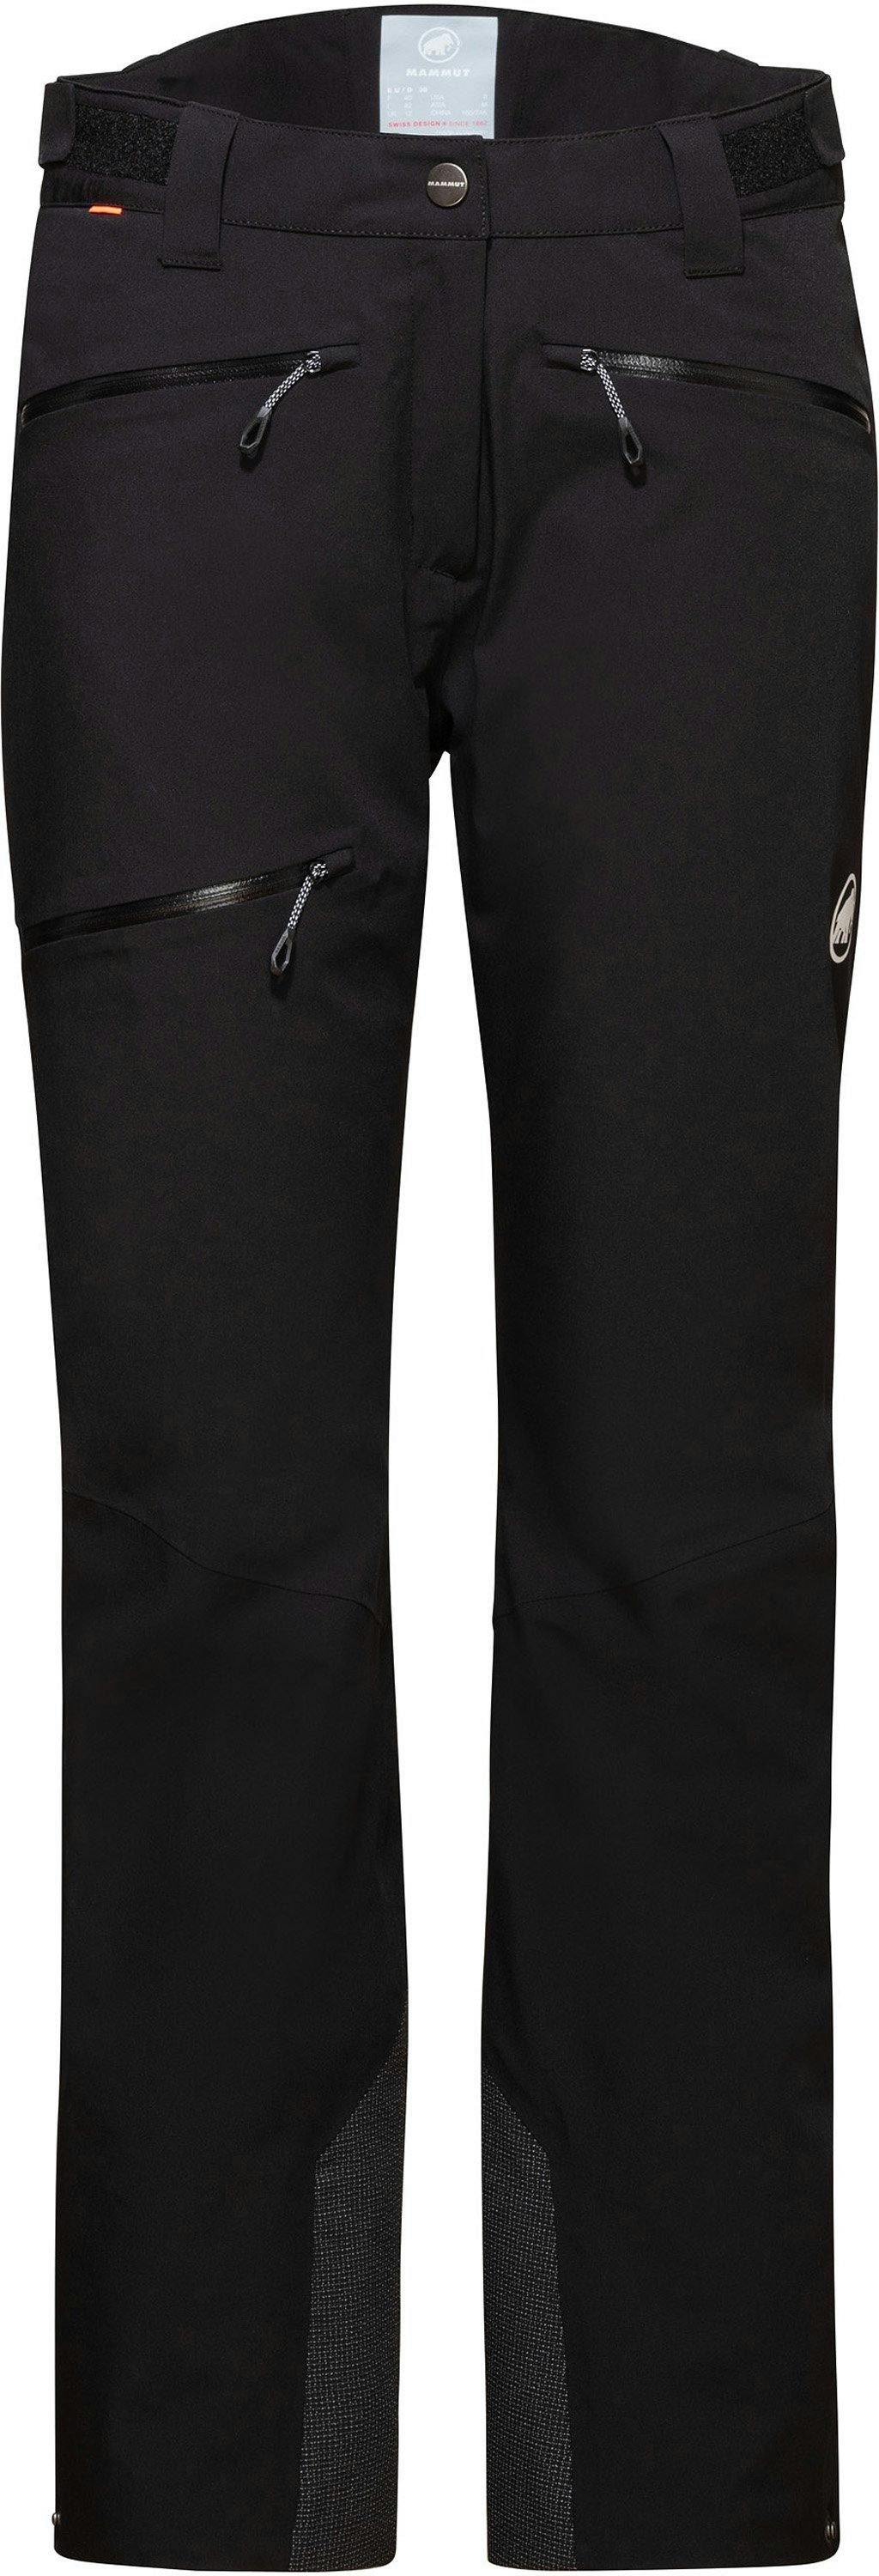 Product image for Stoney HS Thermo Pants - Women's